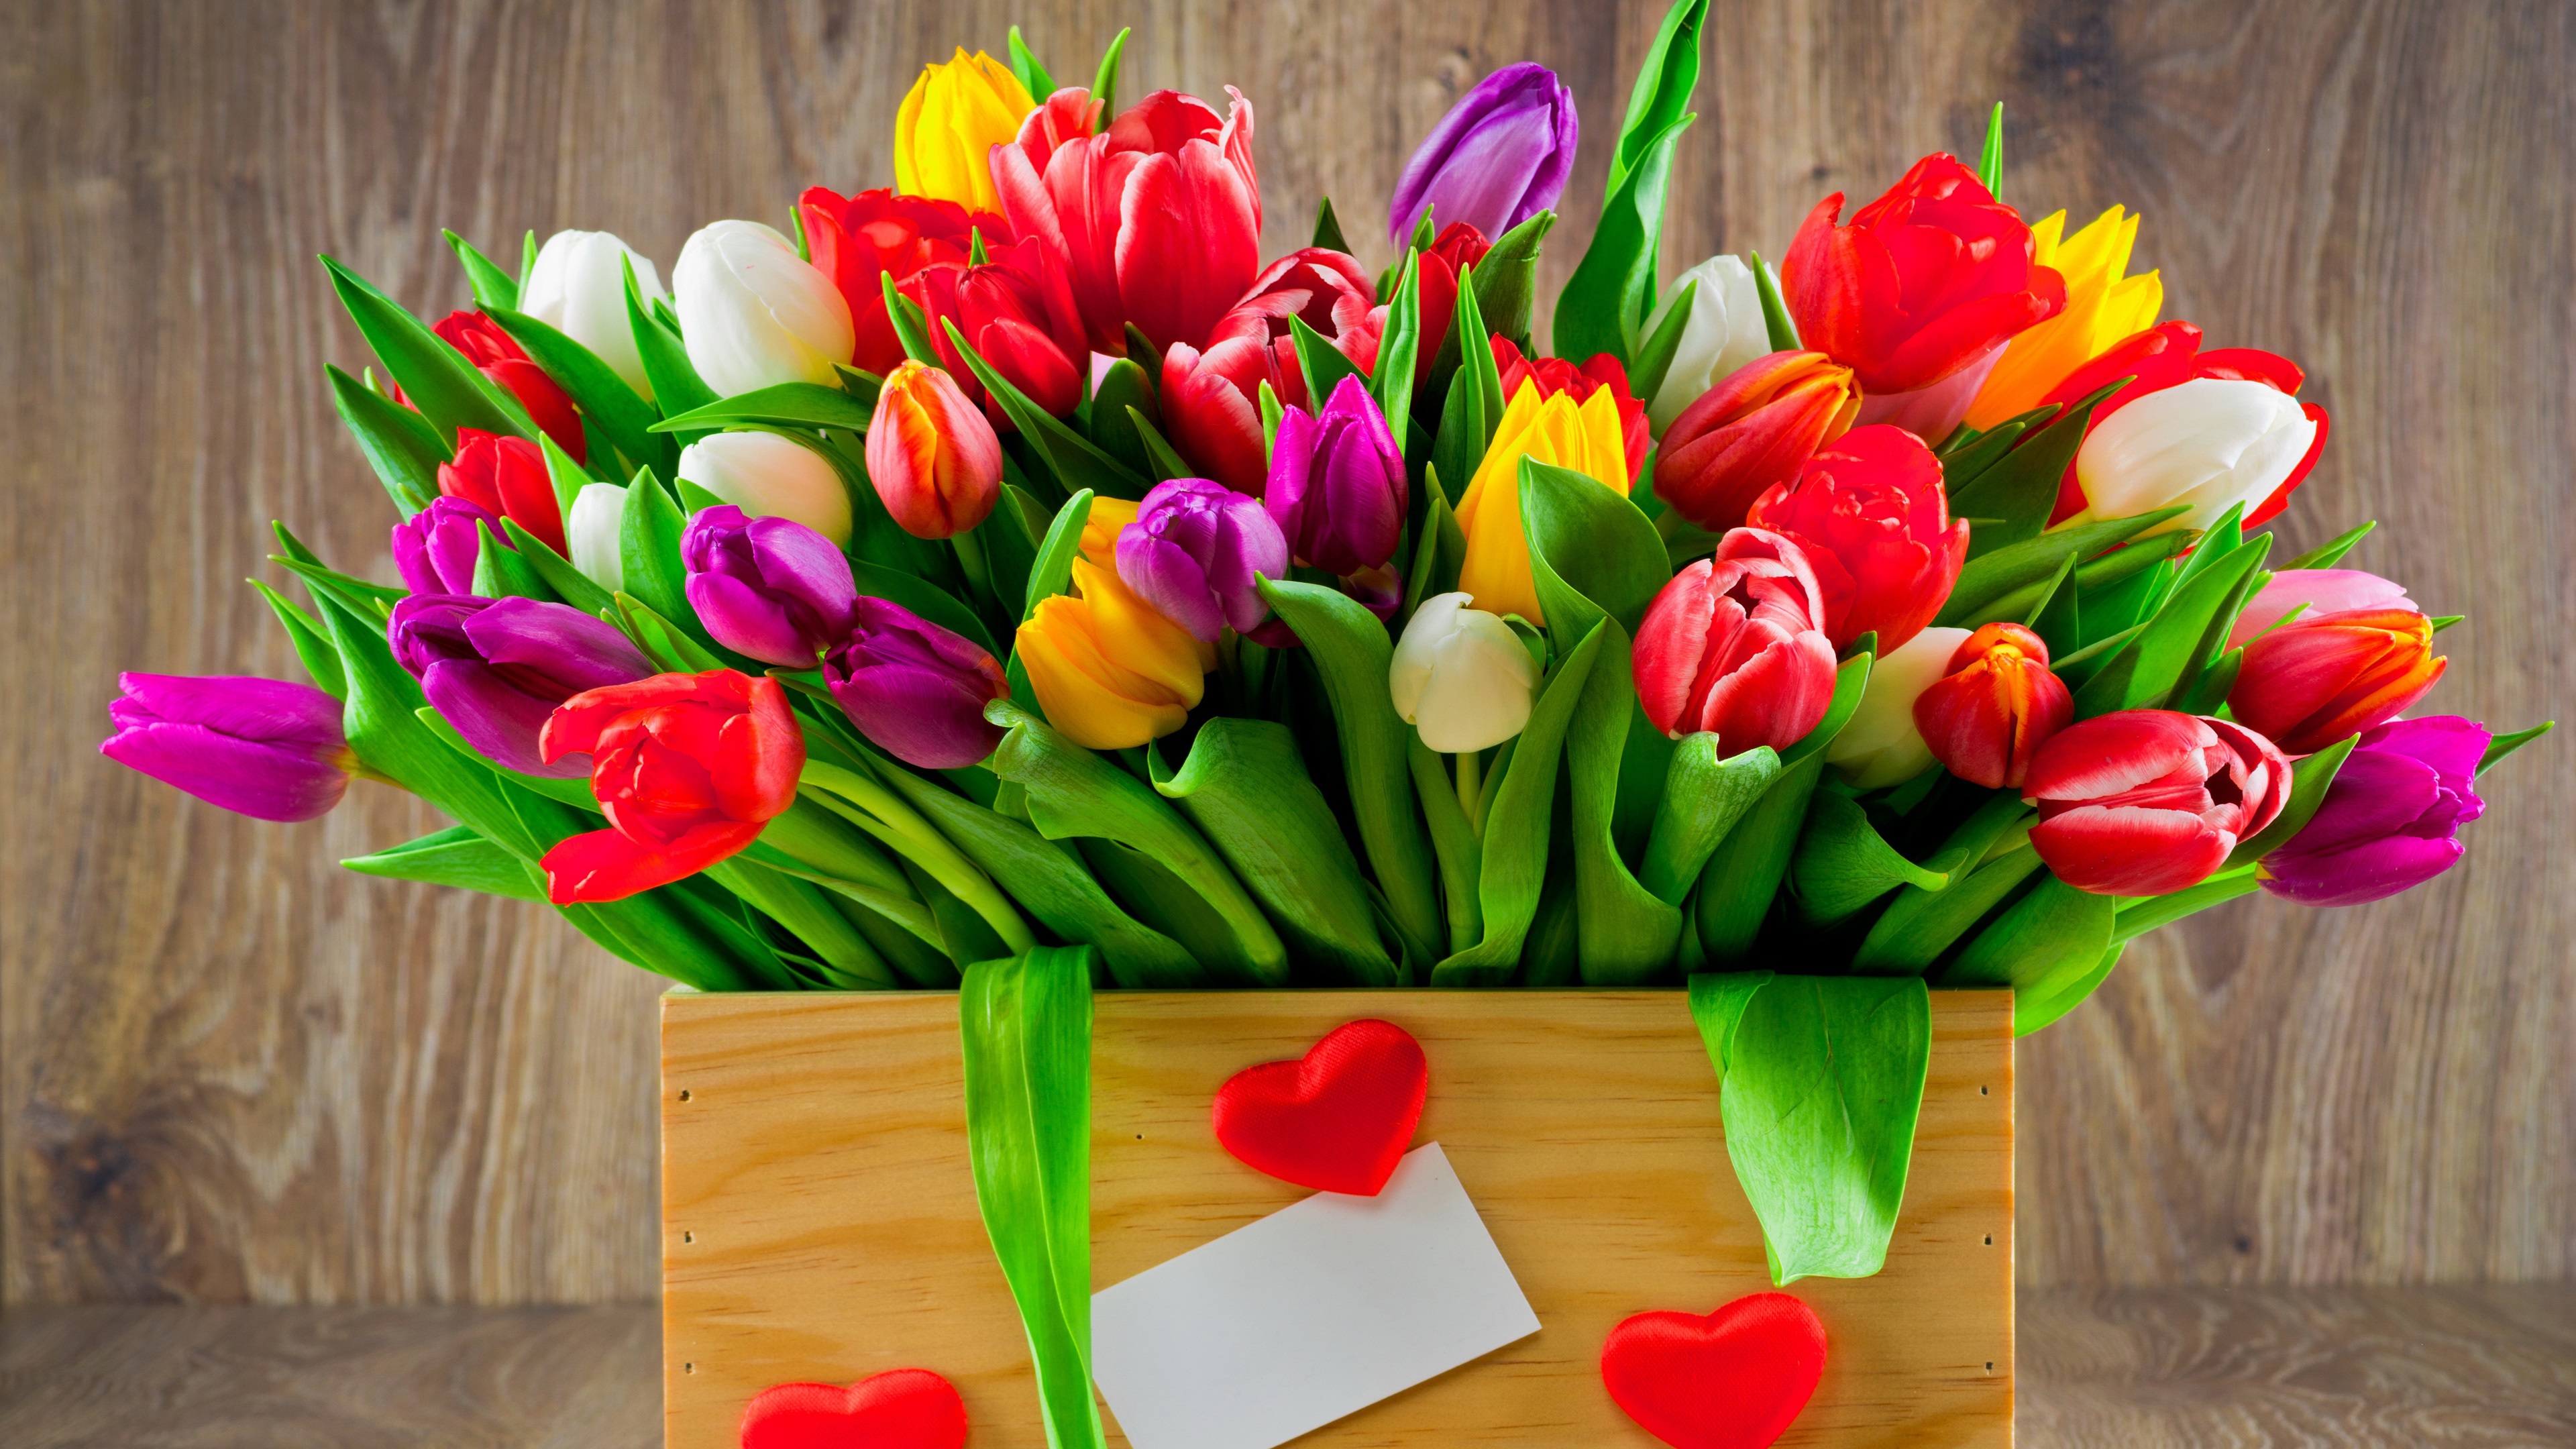 heart, man made, flower, box, colorful, colors, earth, purple flower, red flower, tulip, white flower, yellow flower cellphone